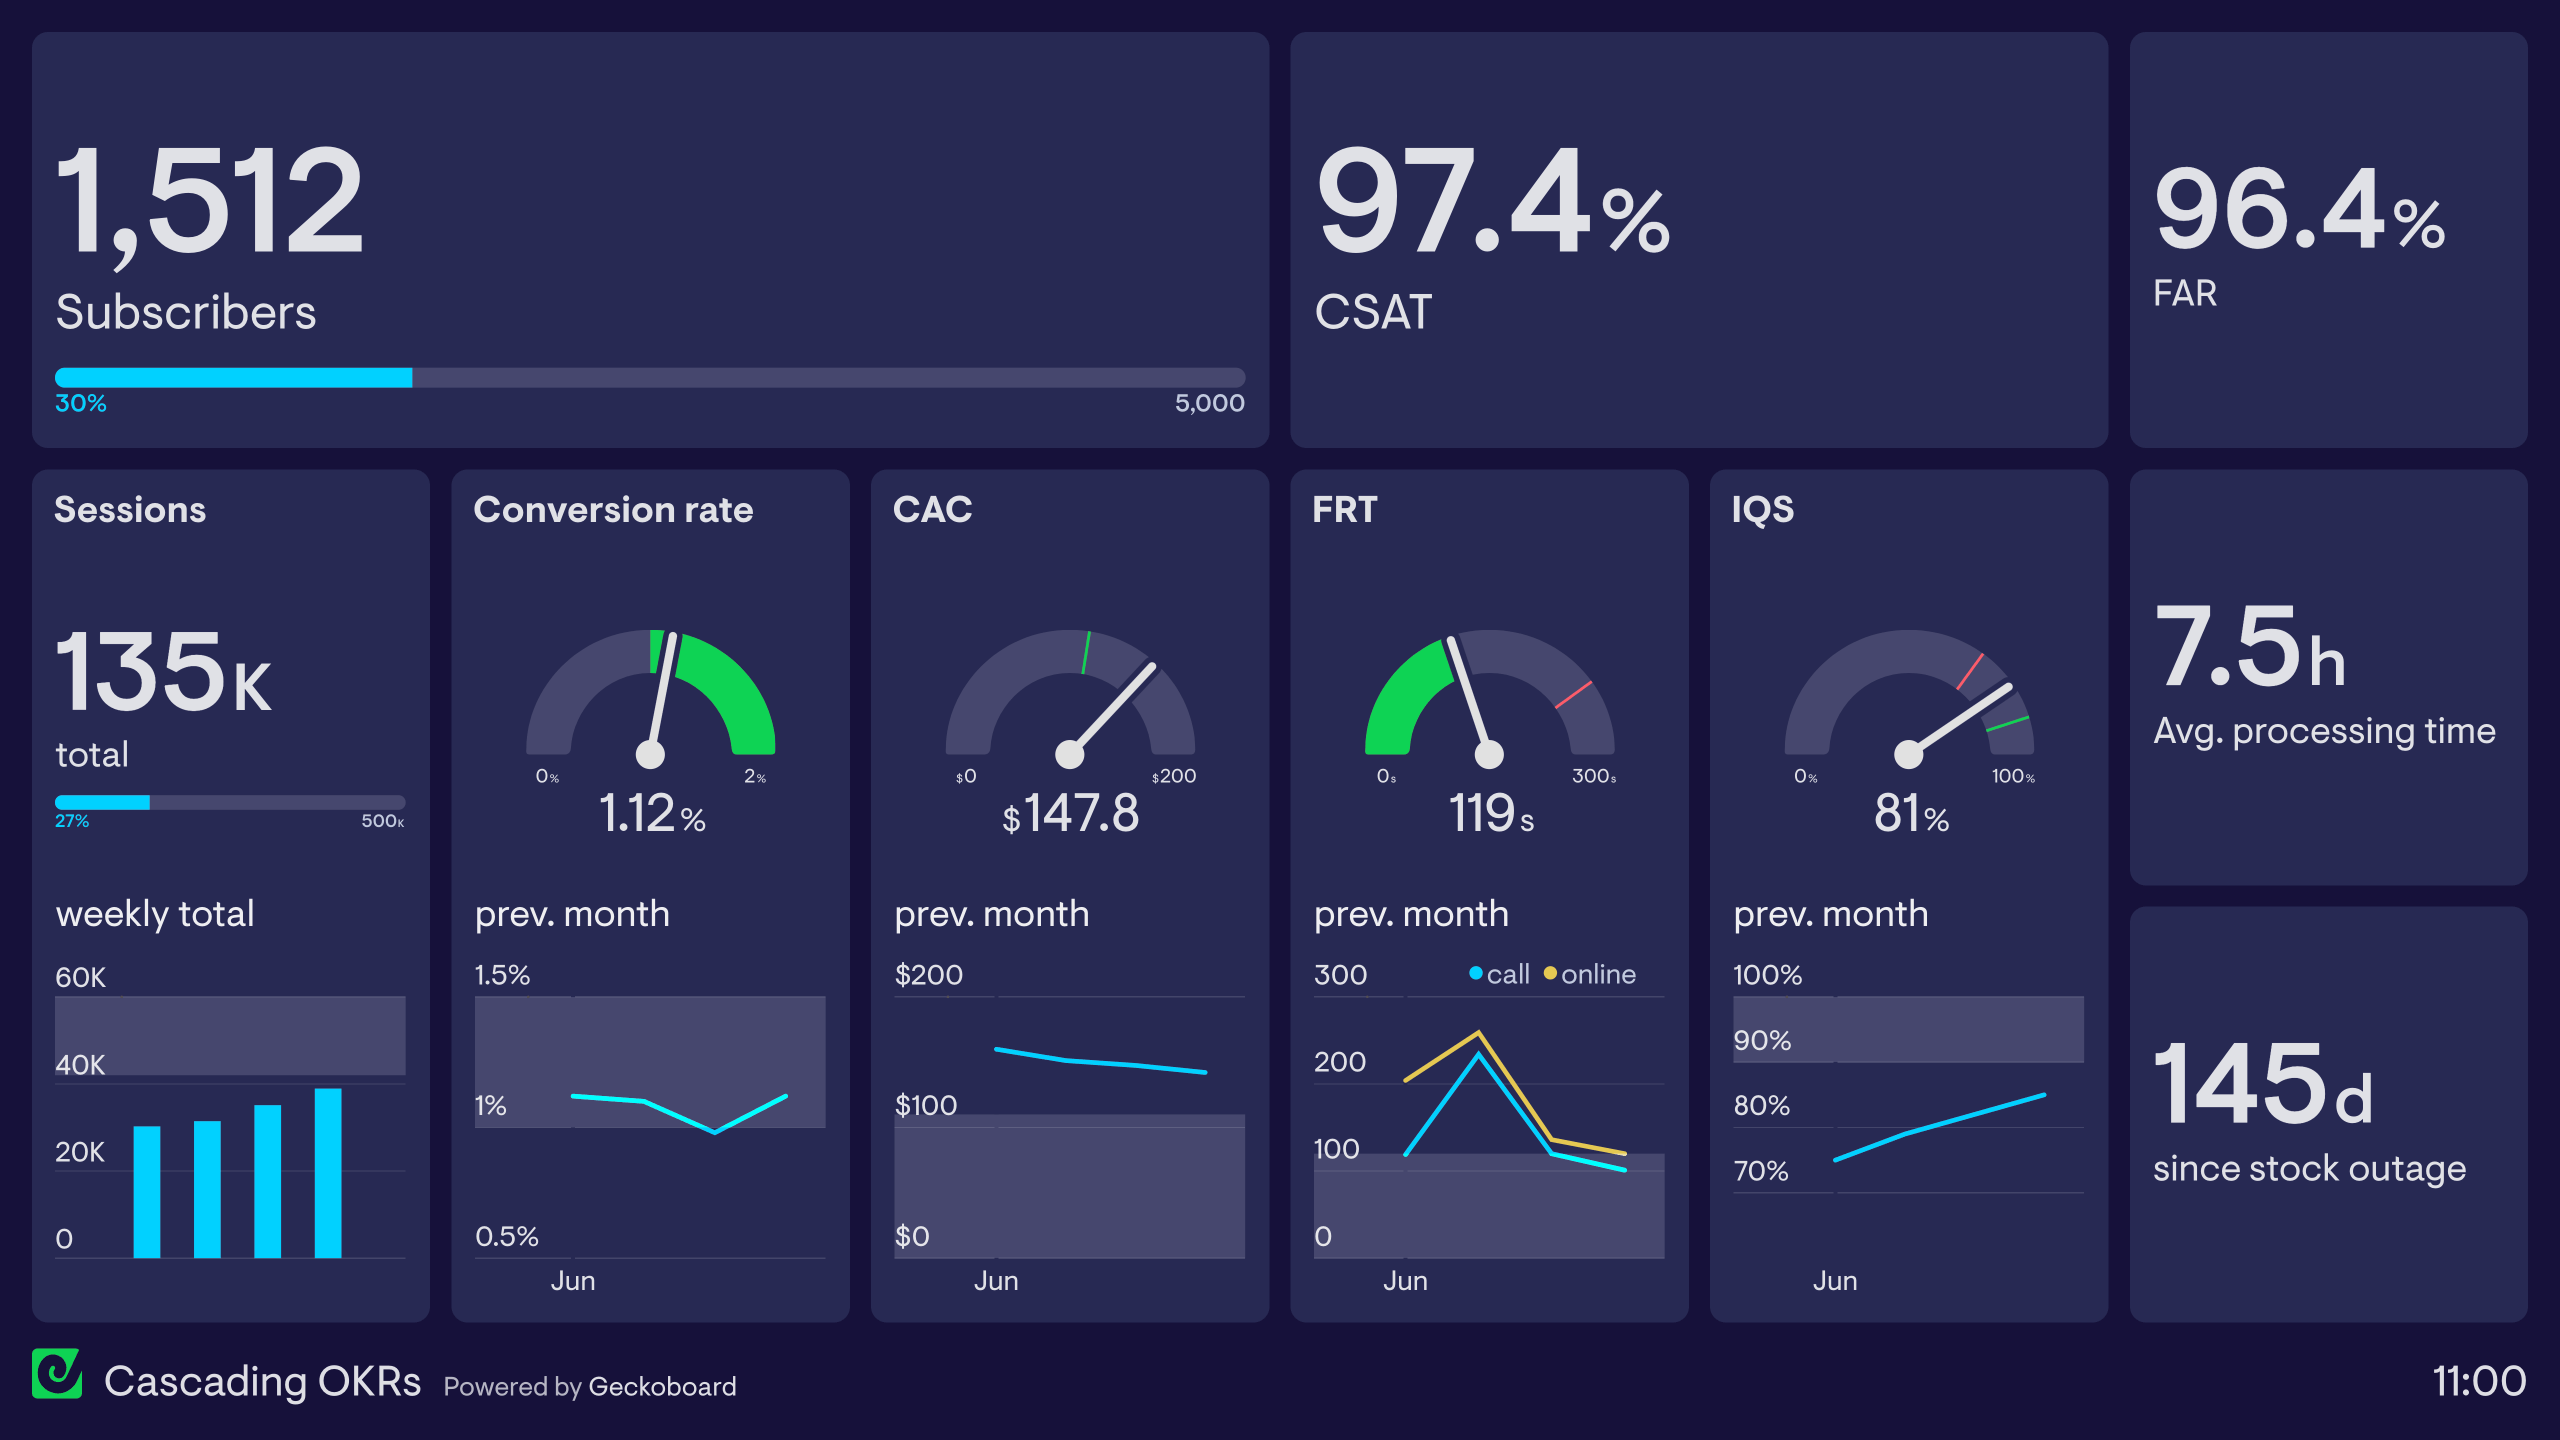 Example of a dashboard that visualizes cascading OKRs.